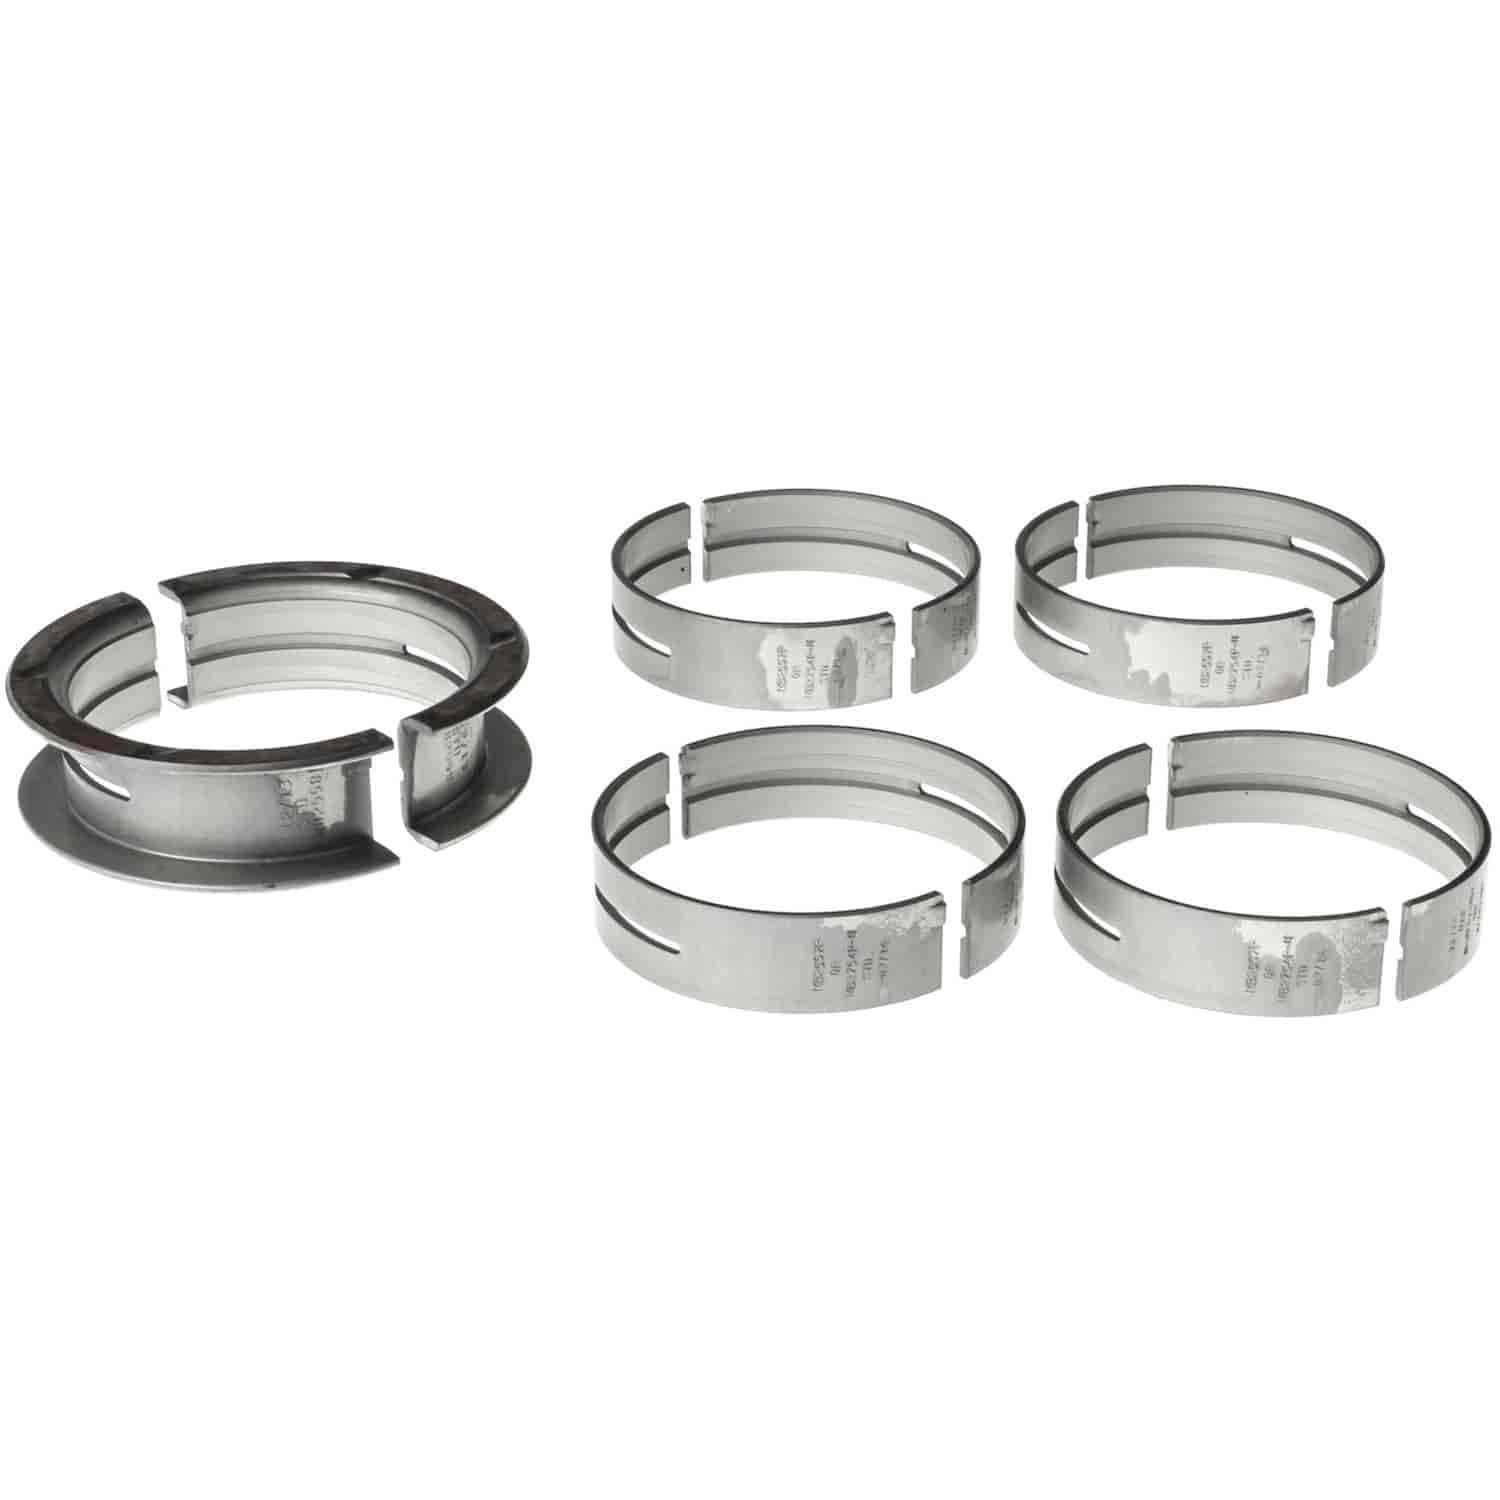 Main Bearing Set Ford 1969-1997 V8 351W/351M/400 (5.8/6.6L) with -.020" Undersize